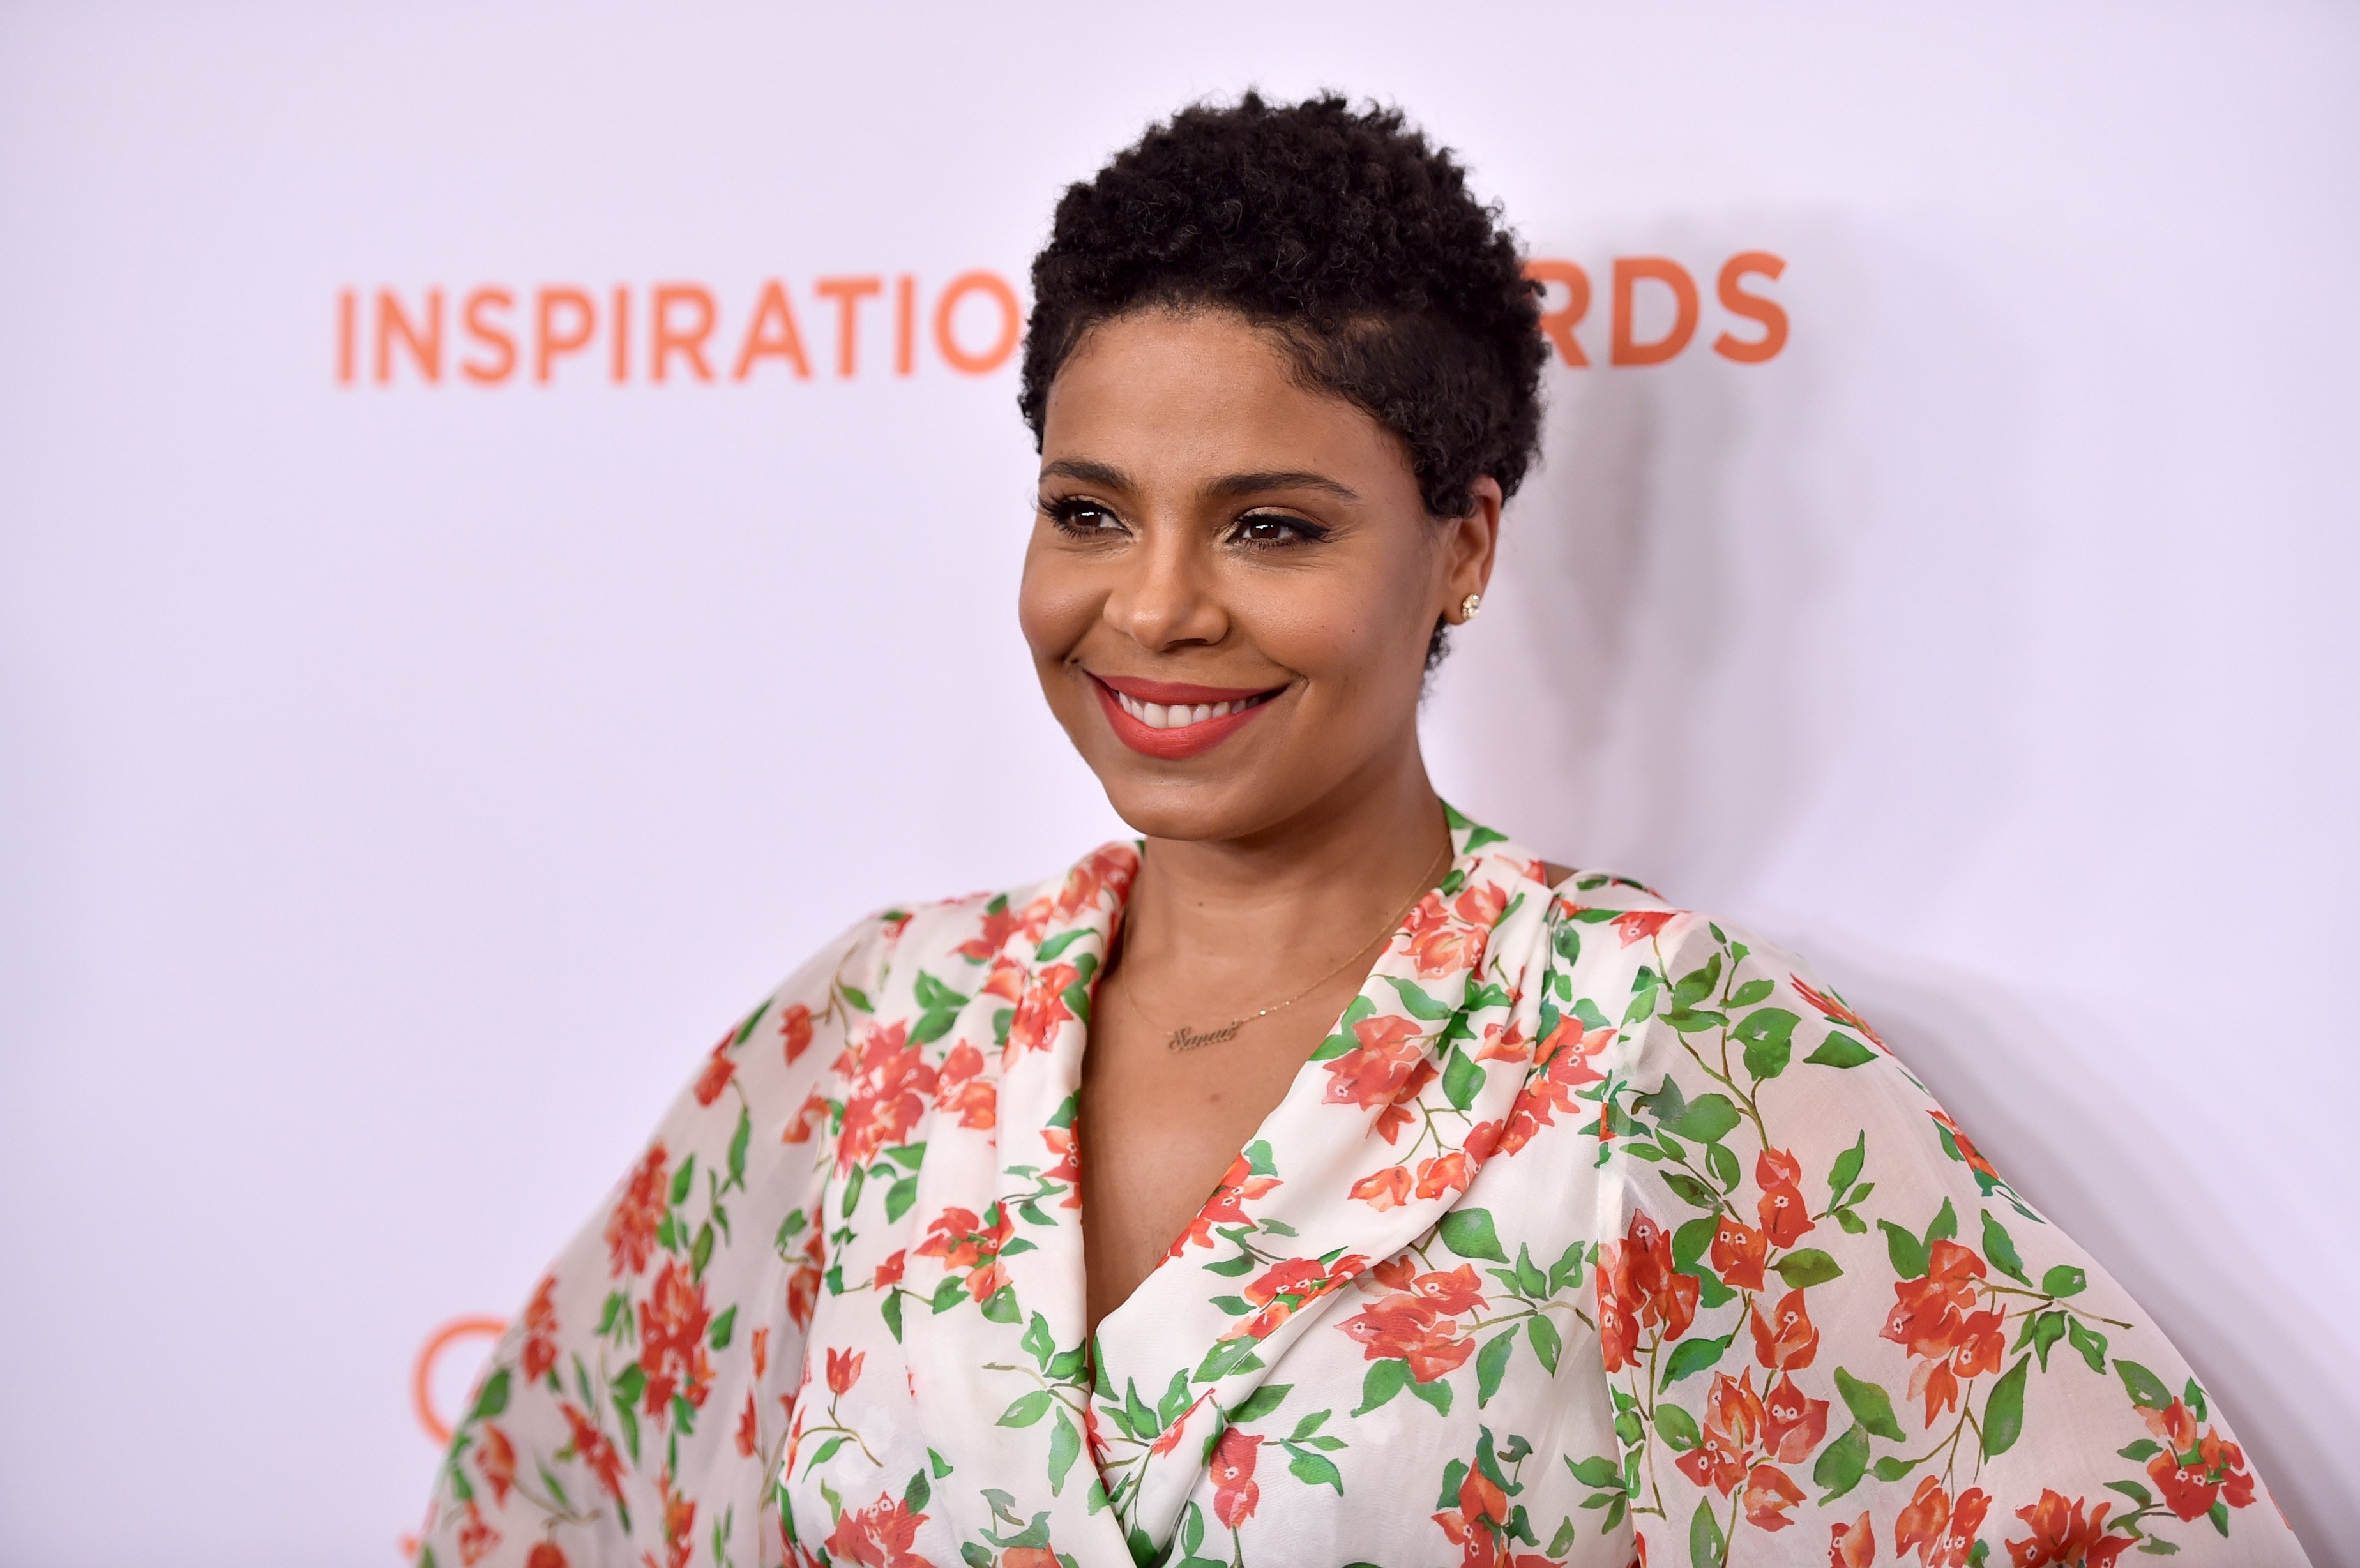 Sanaa Lathan attends Step Up's 14th annual Inspiration Awards at the Beverly Wilshire Four Seasons Hotel on June 1, 2018 in Beverly Hills, California | Photo: GettyImages